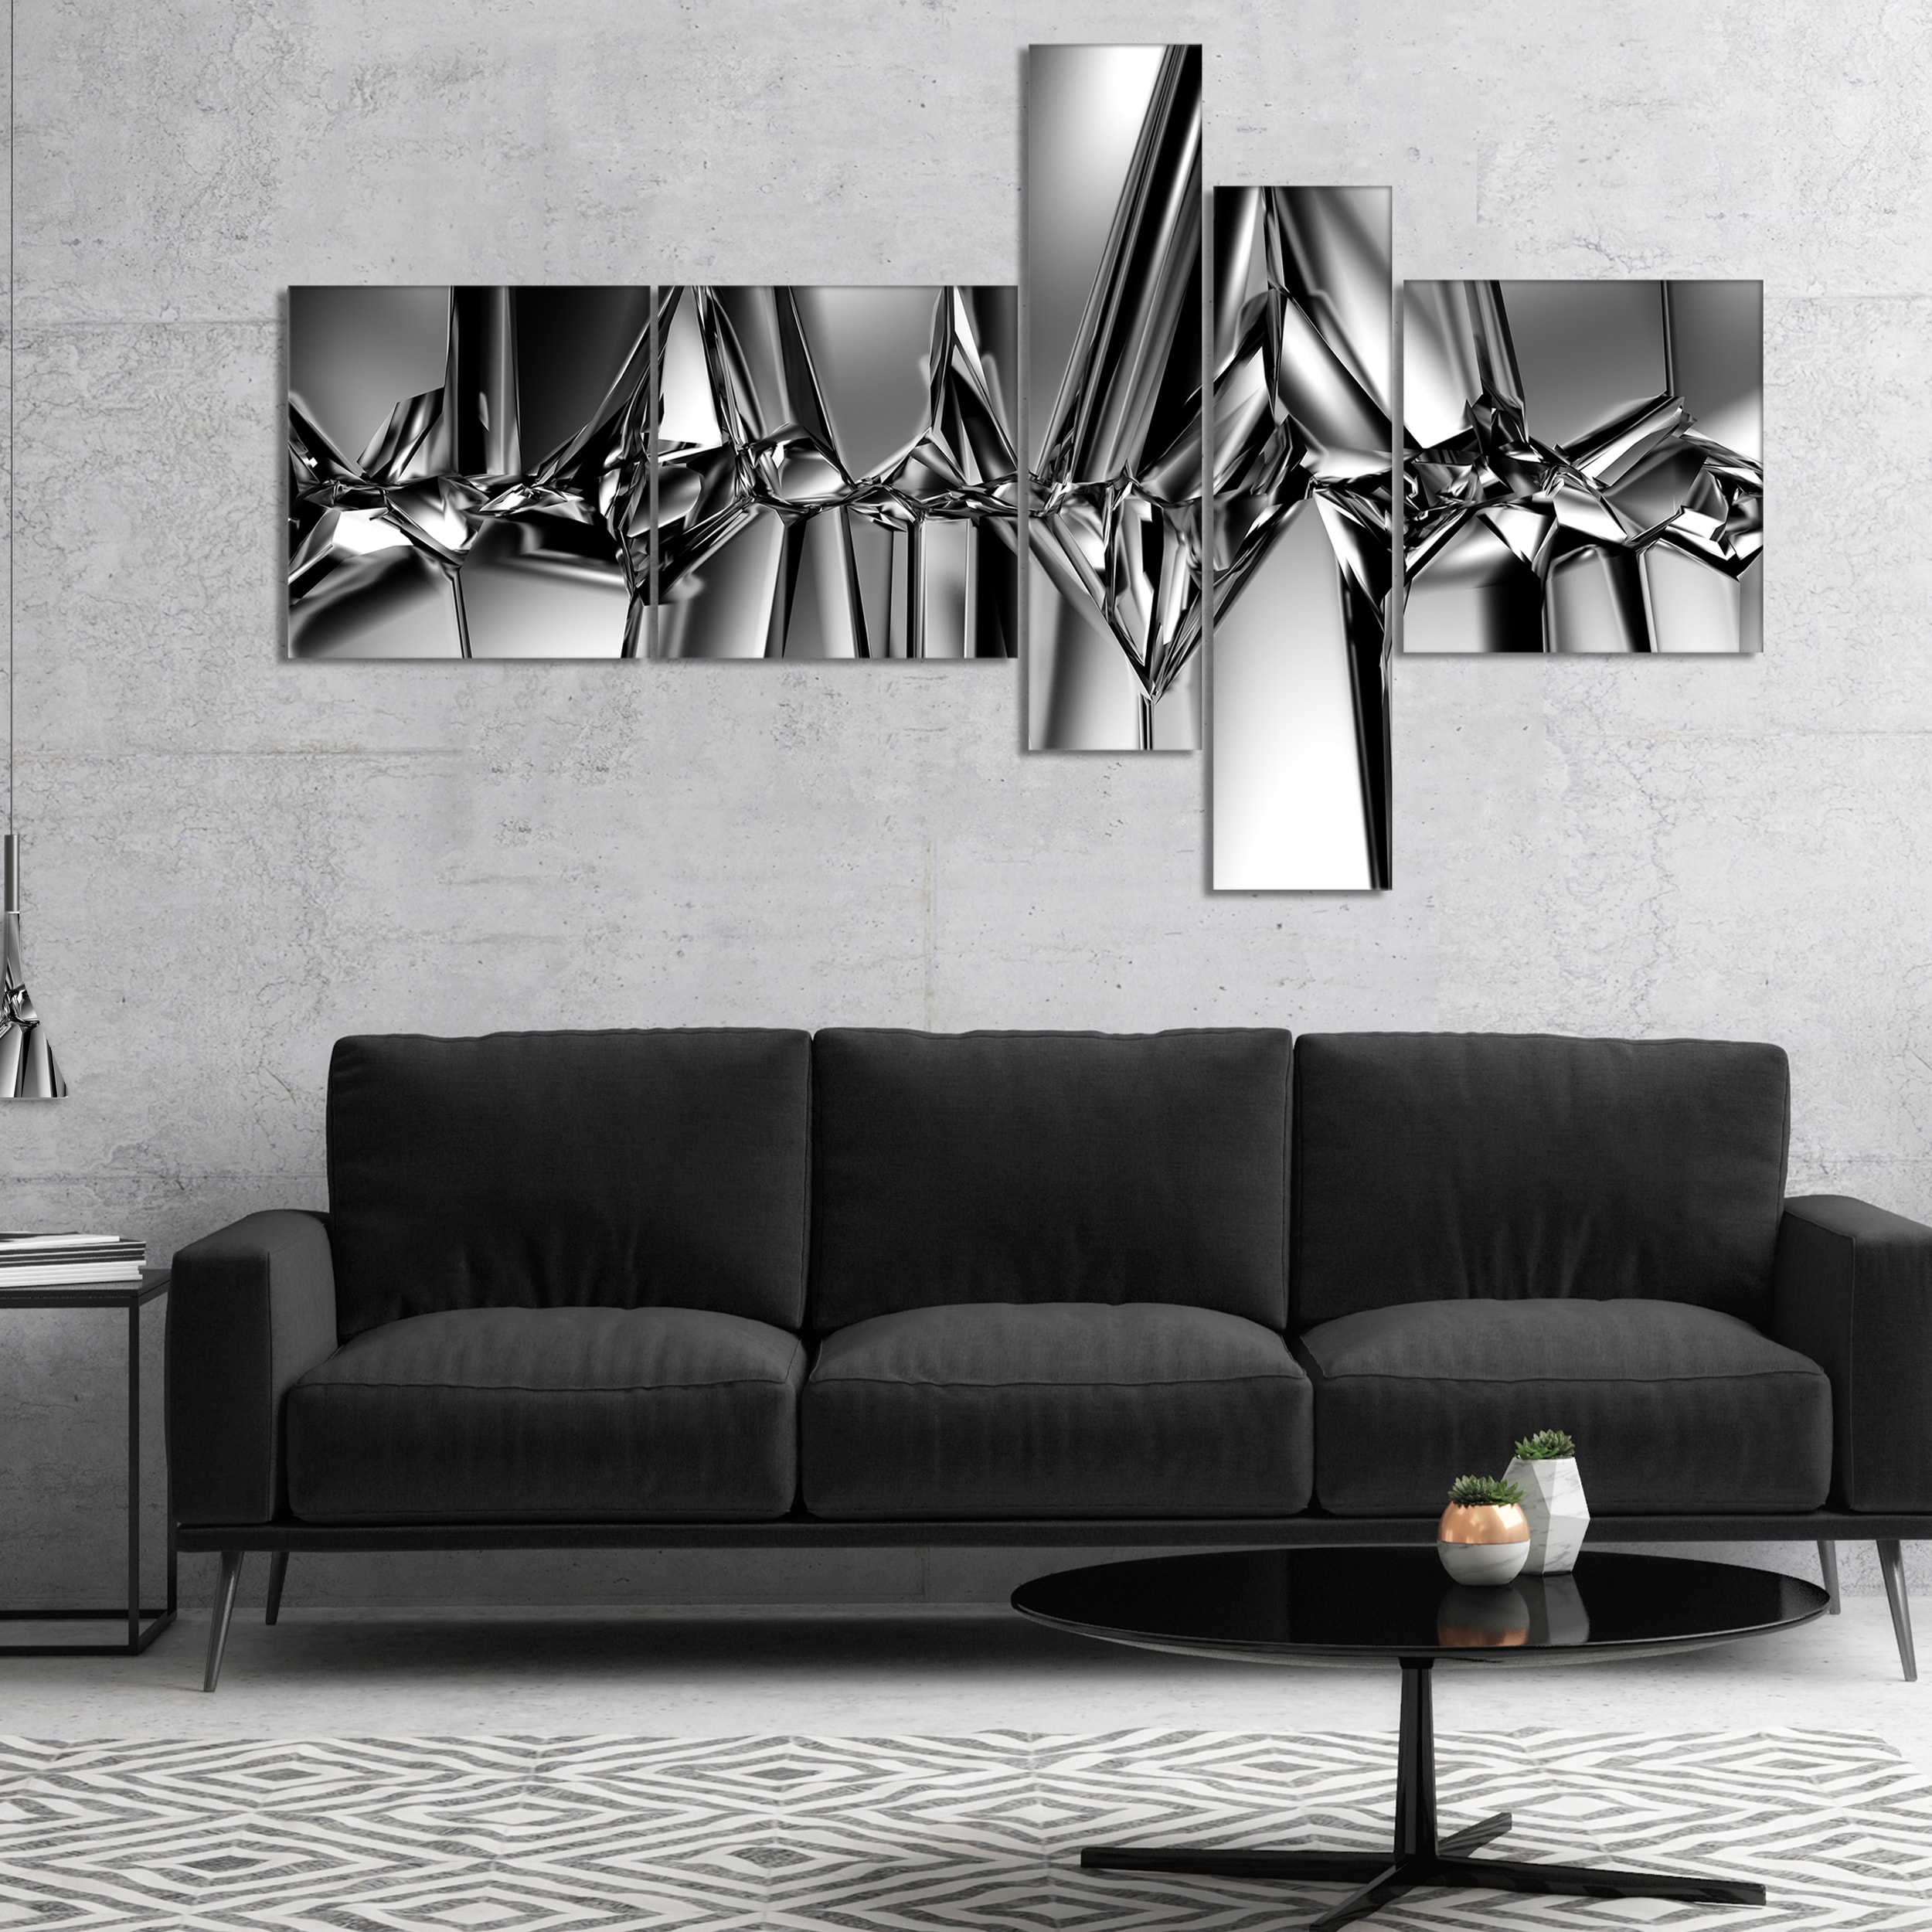 Black And White Wall Pictures For Living Room / Modern Black And White